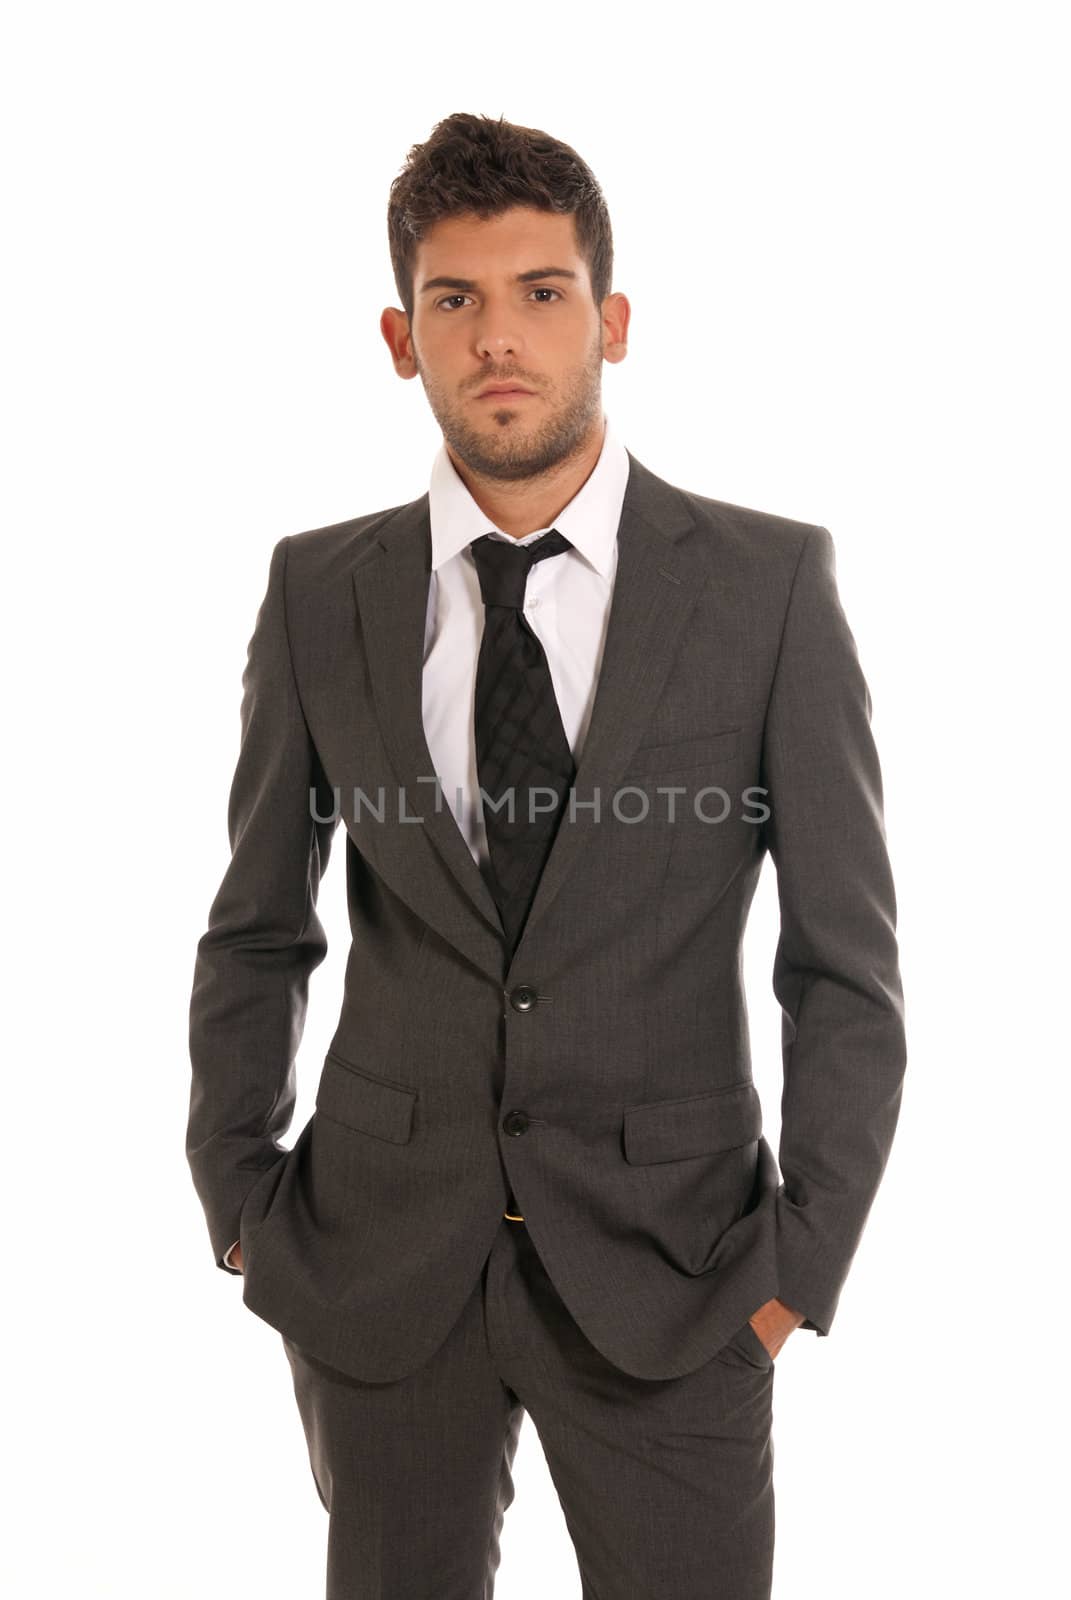 Young businessman looking serious hands in pockets isolated on white background